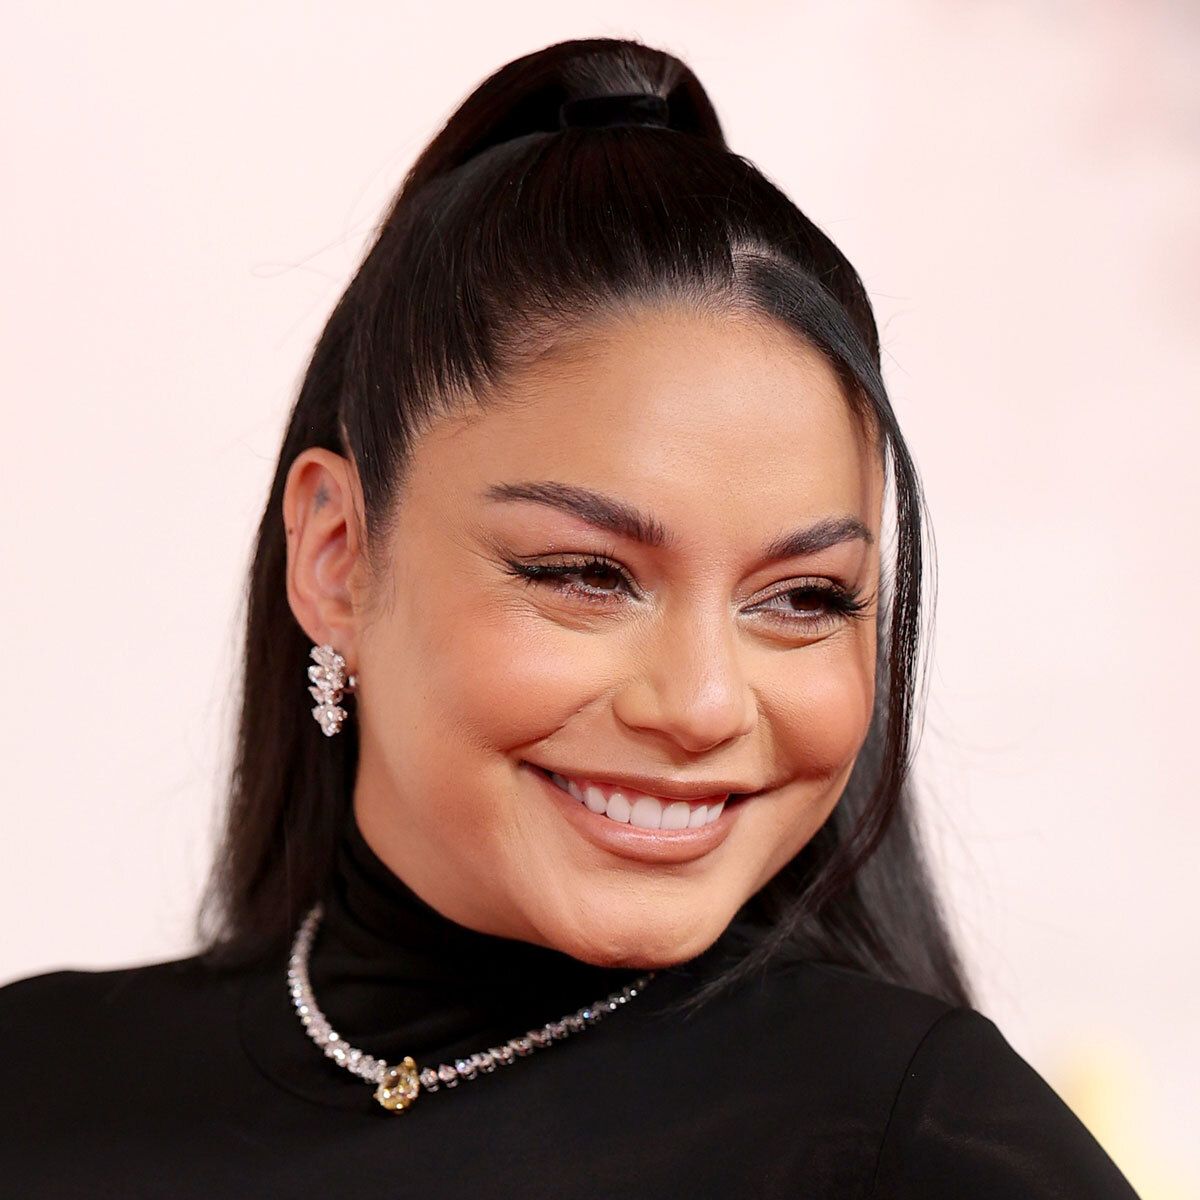 Pregnant Vanessa Hudgens Just Debuted Her Baby Bump on the Oscars Red Carpet